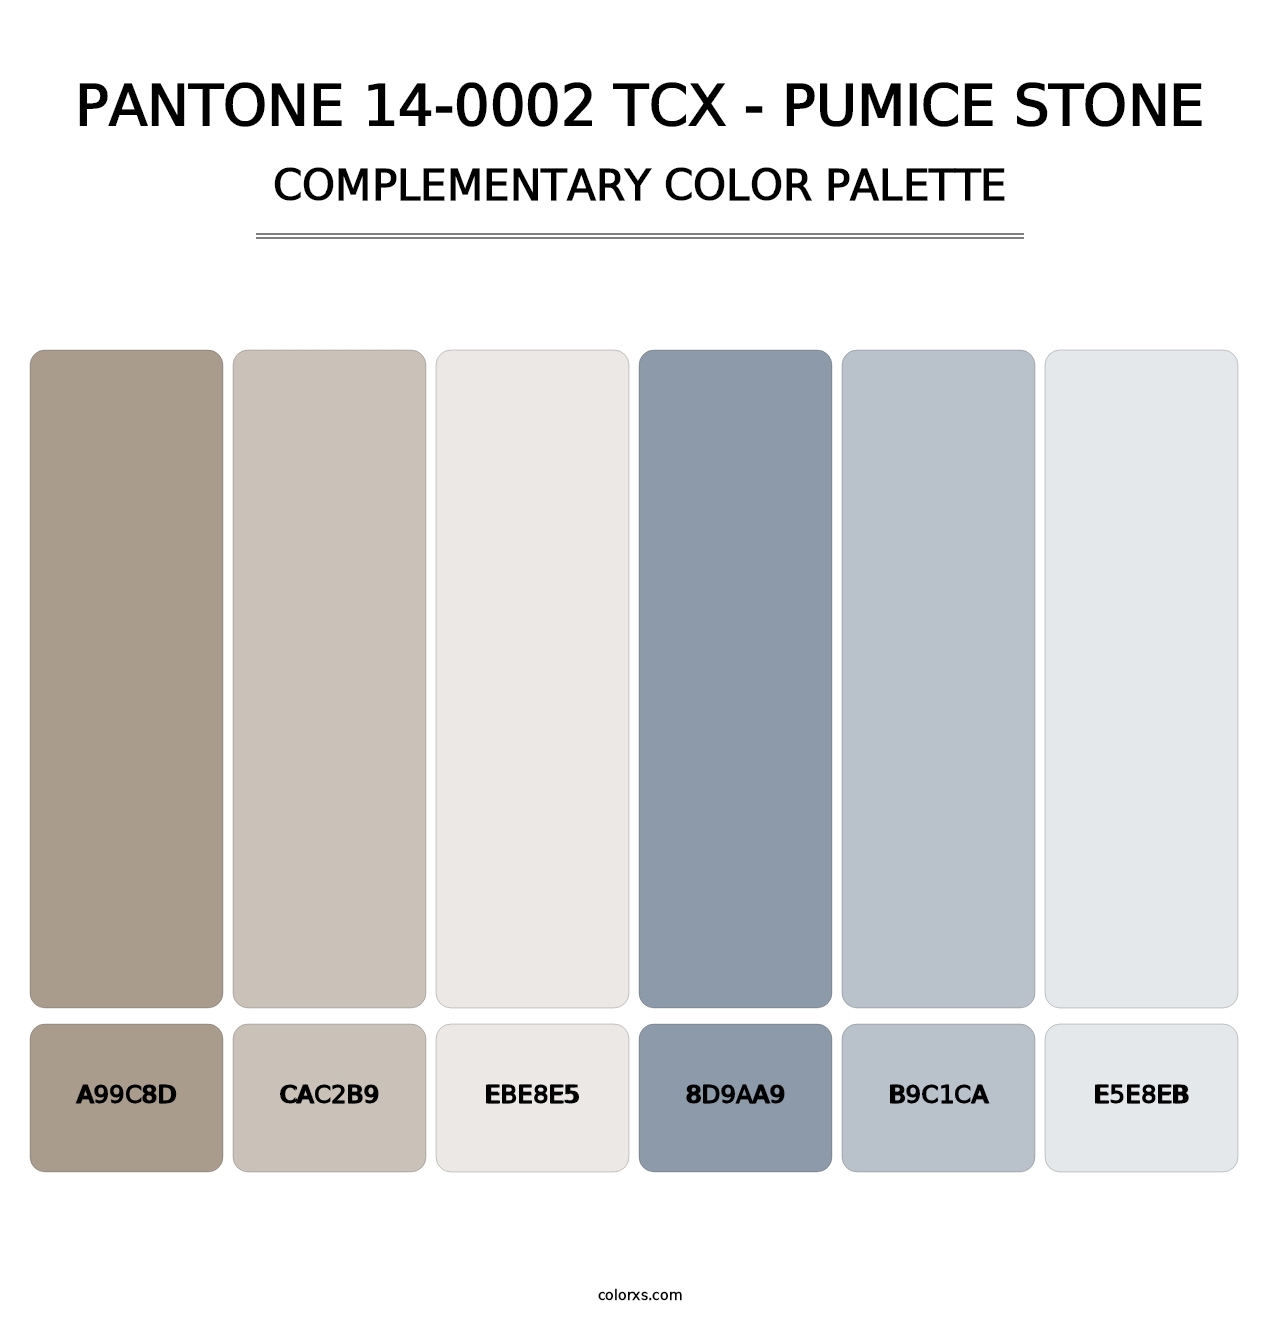 PANTONE 14-0002 TCX - Pumice Stone - Complementary Color Palette